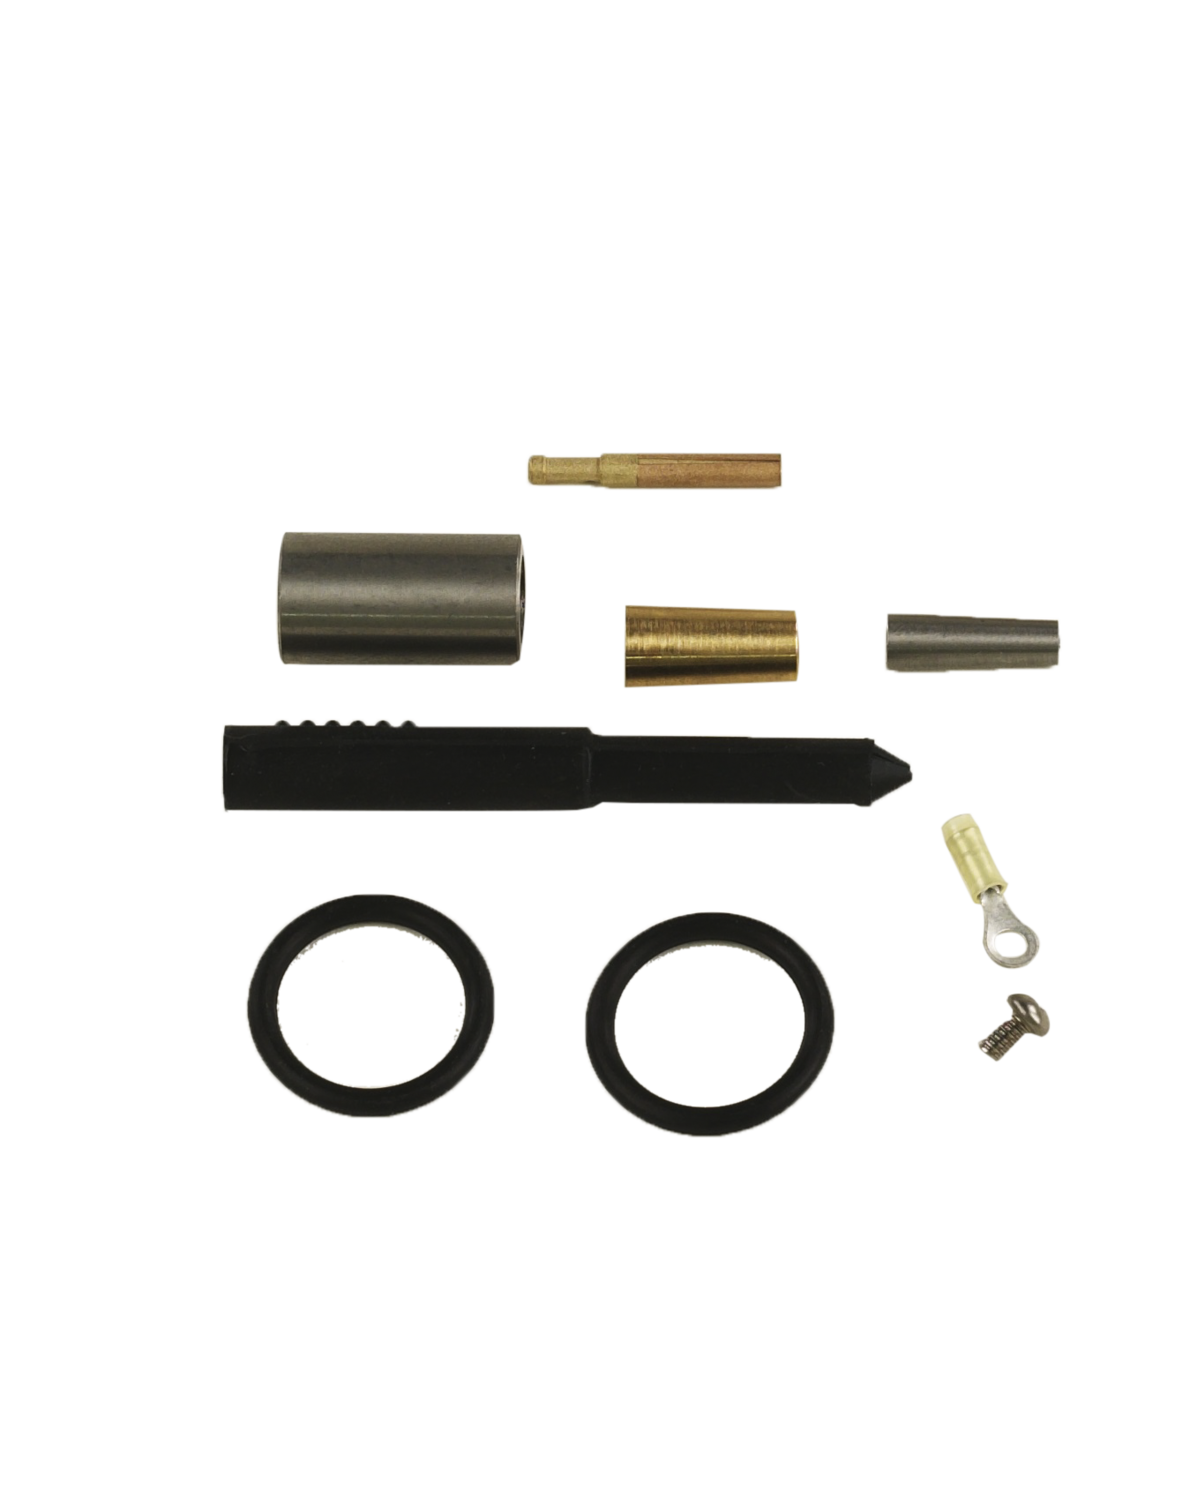 Basic Rehead Kit for 2.54 and 3.17 mm (0.10 & 0.125